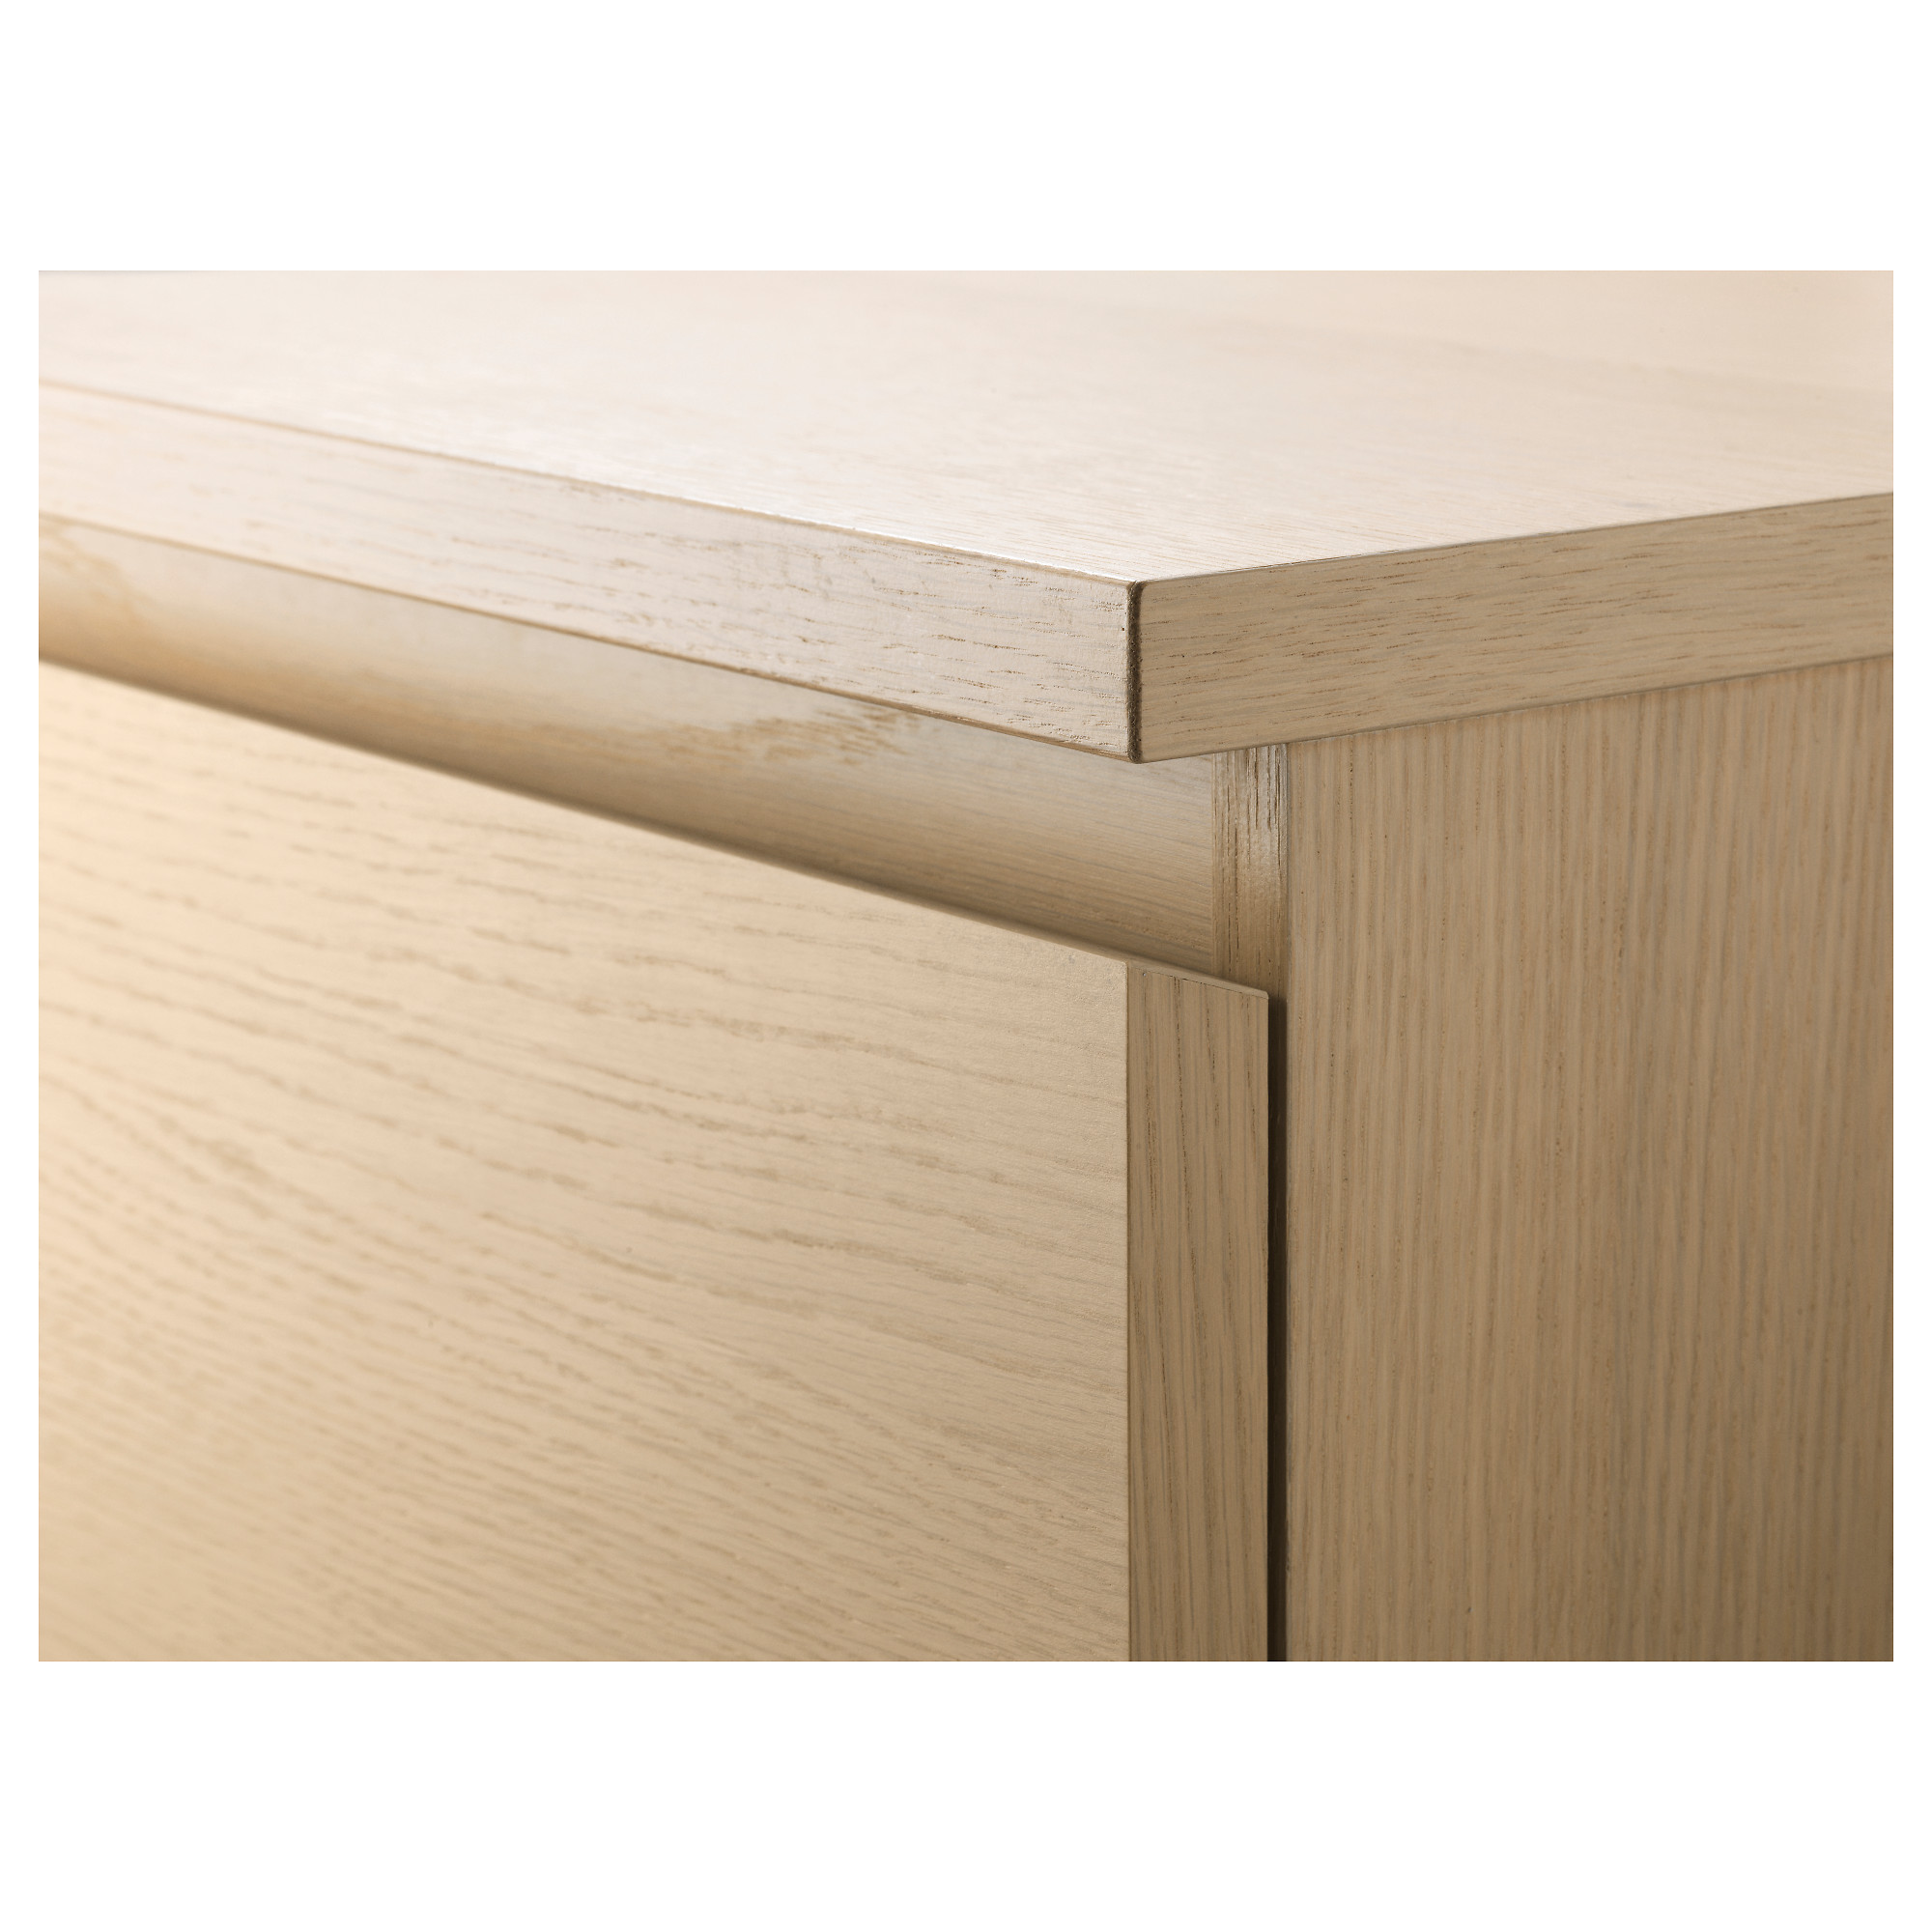 MALM chest of 2 drawers